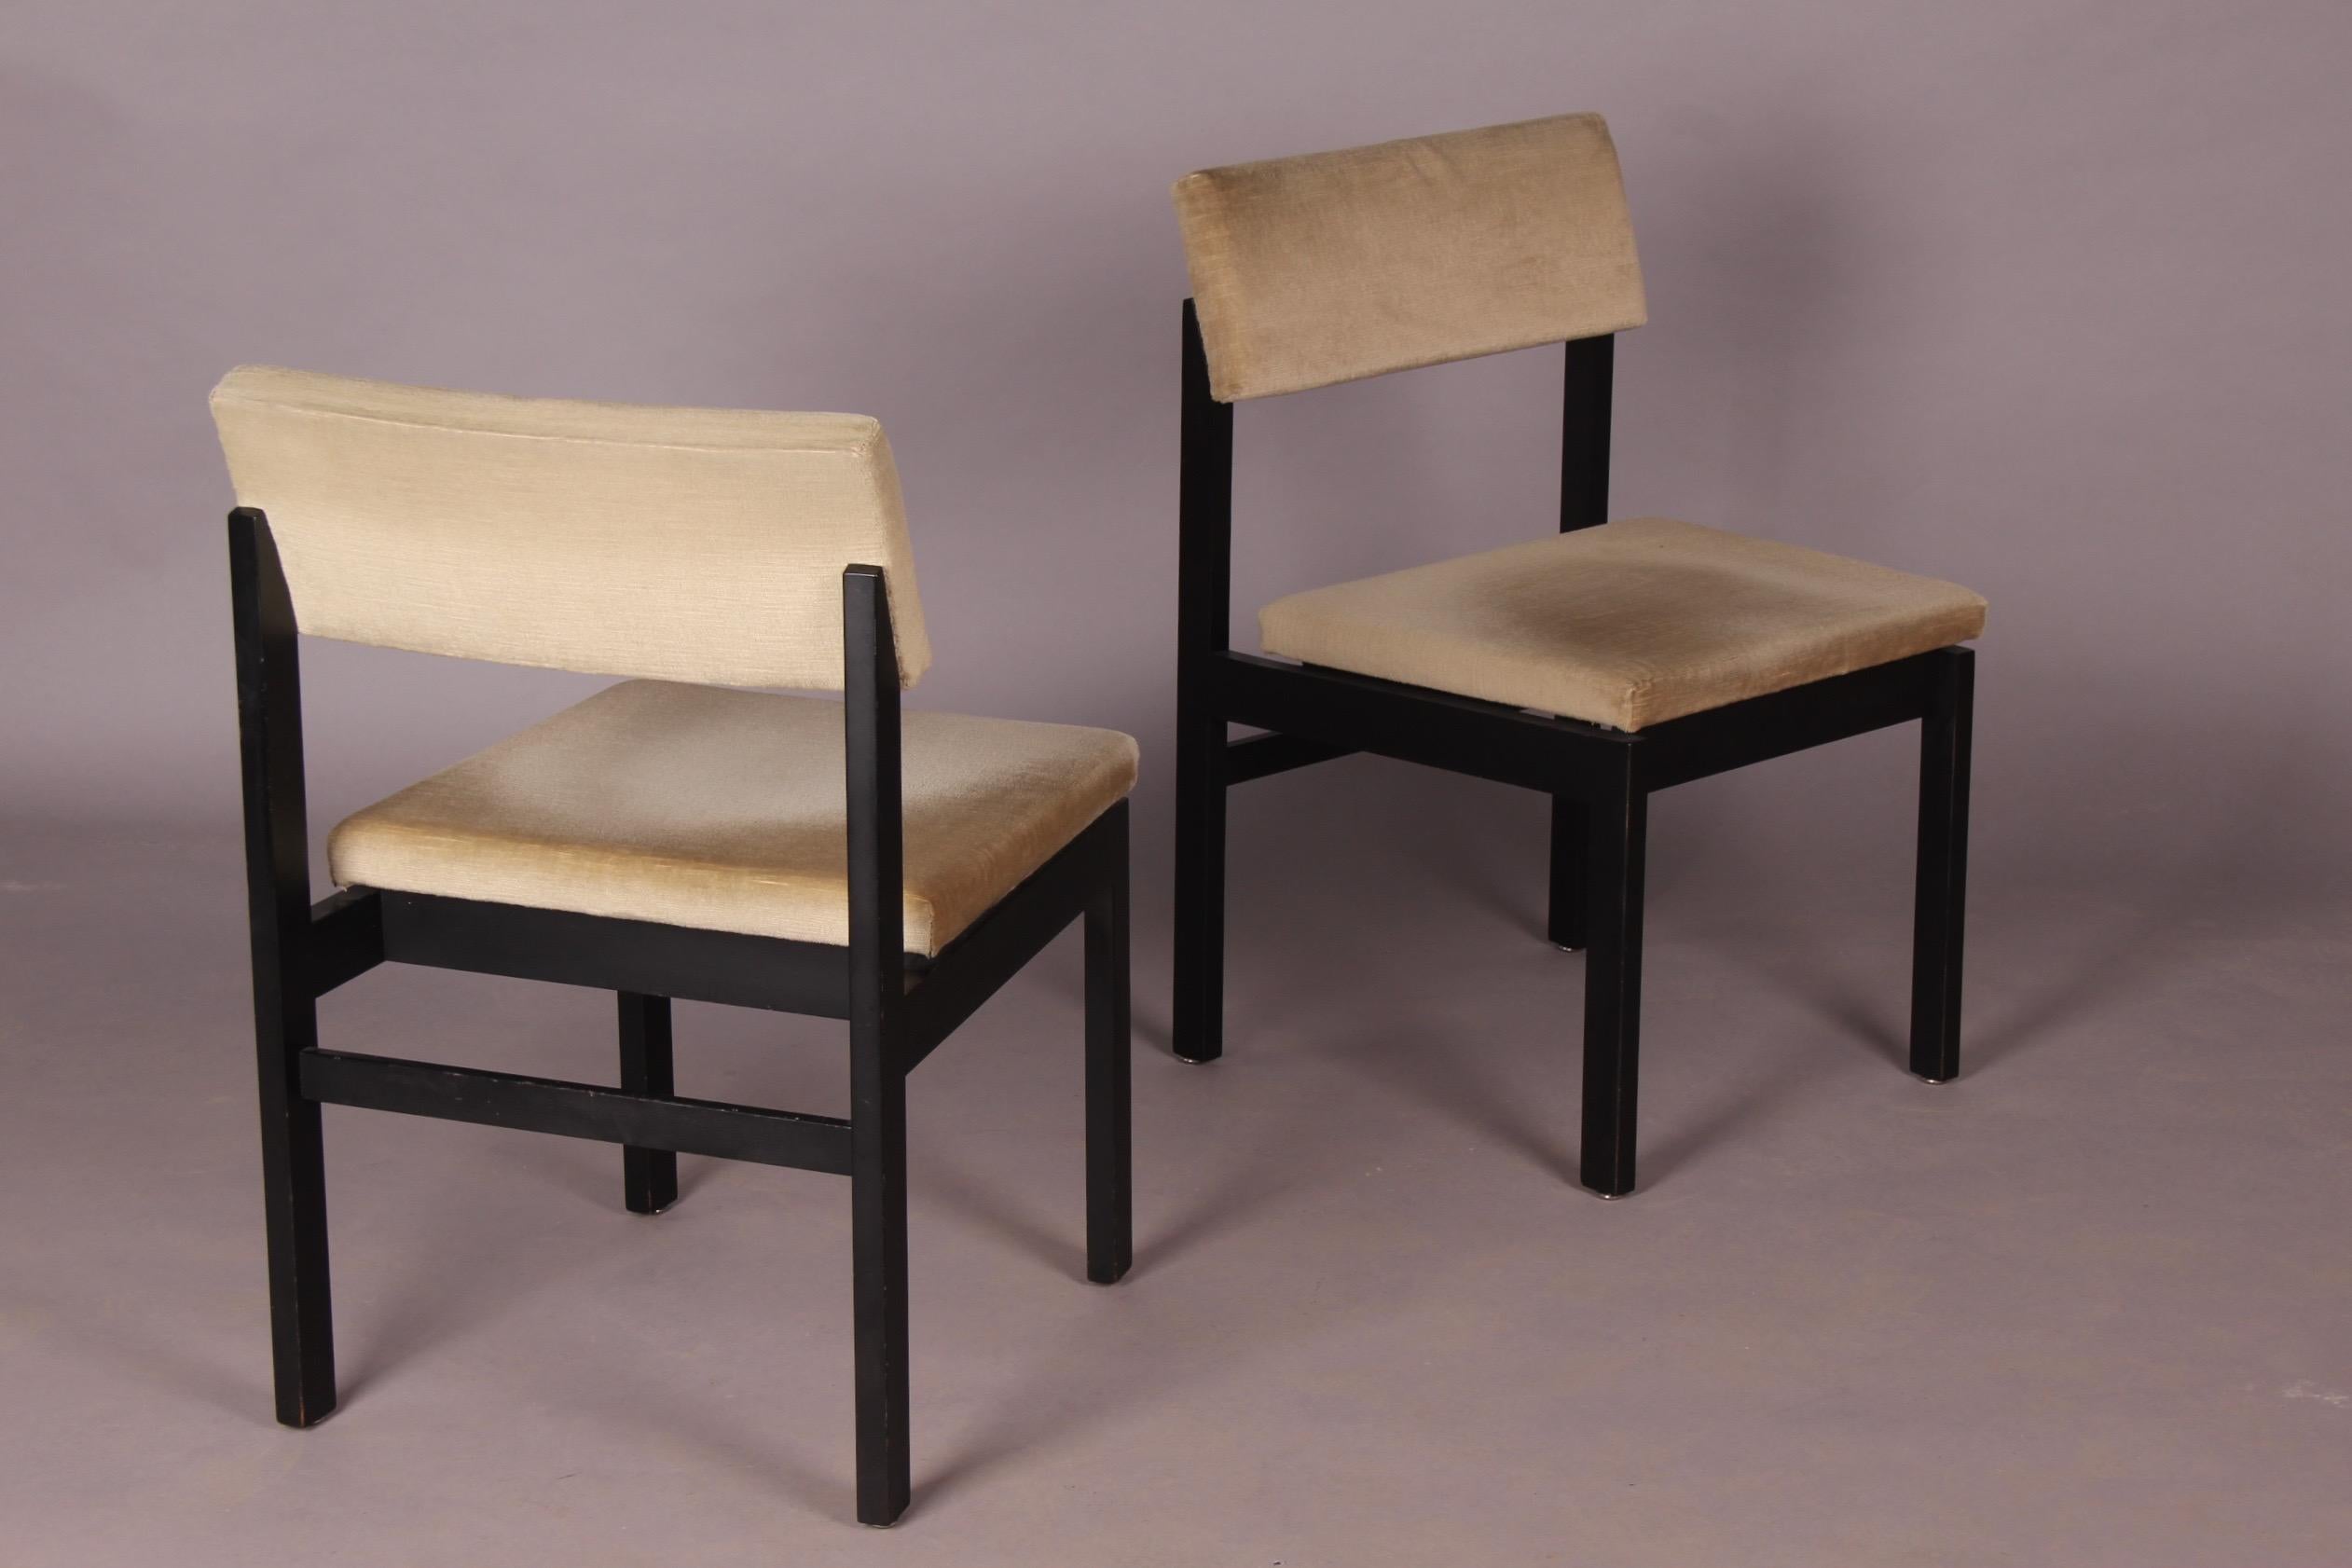 6 chairs 3100 by Willy Guhl for Dietiker, 1959.